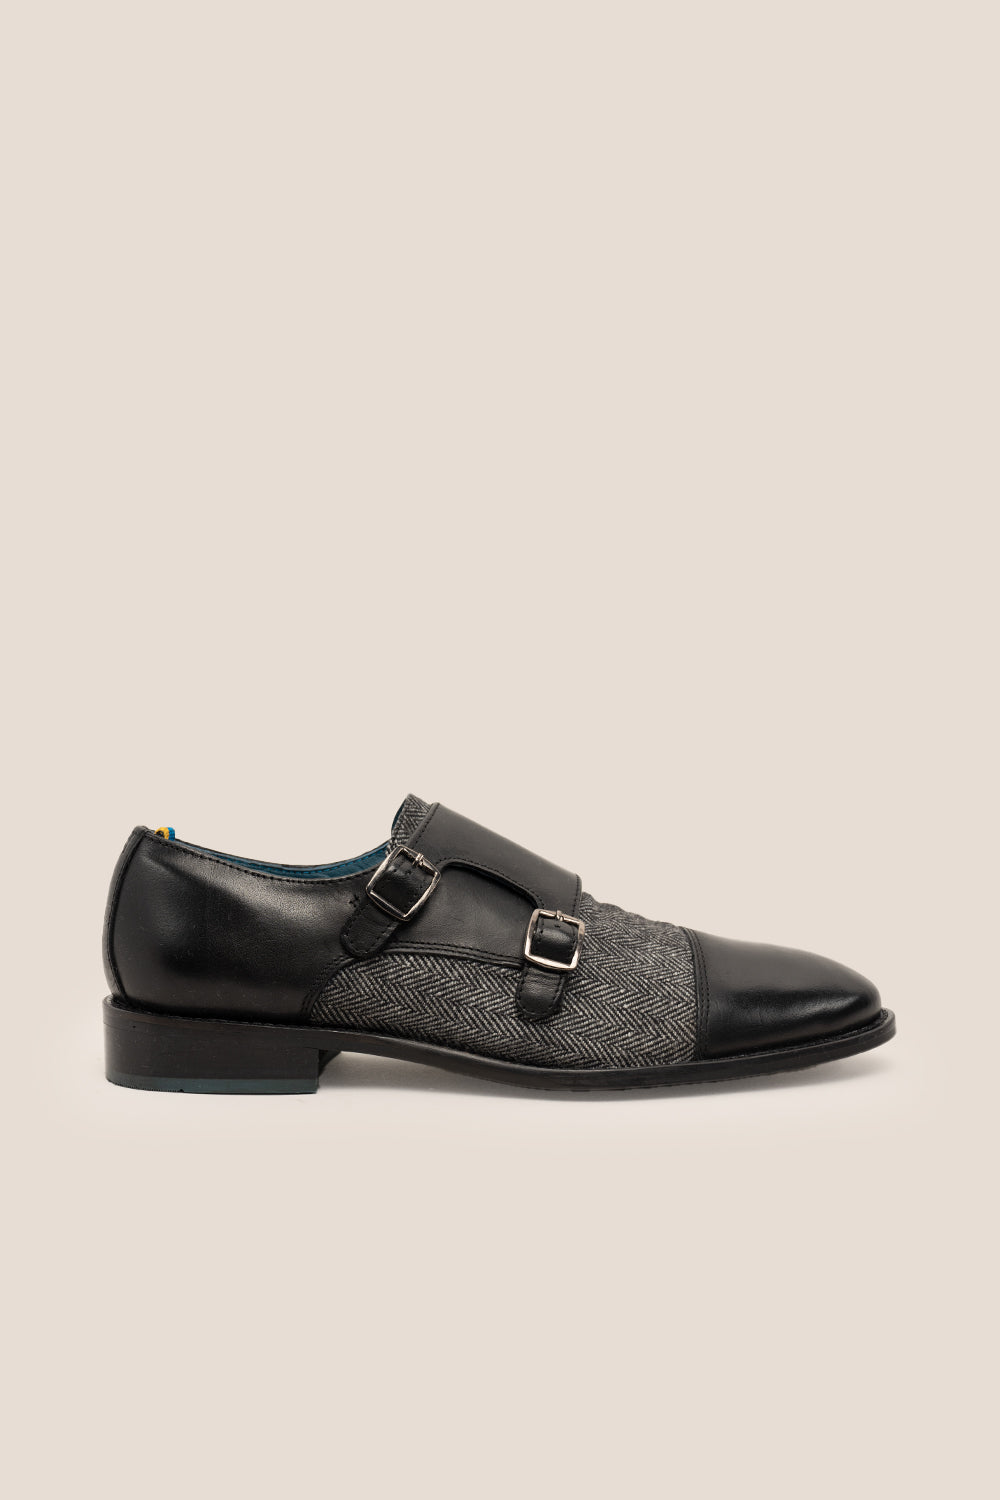 Oscar Black leather and tweed mens shoe Oswin Hyde